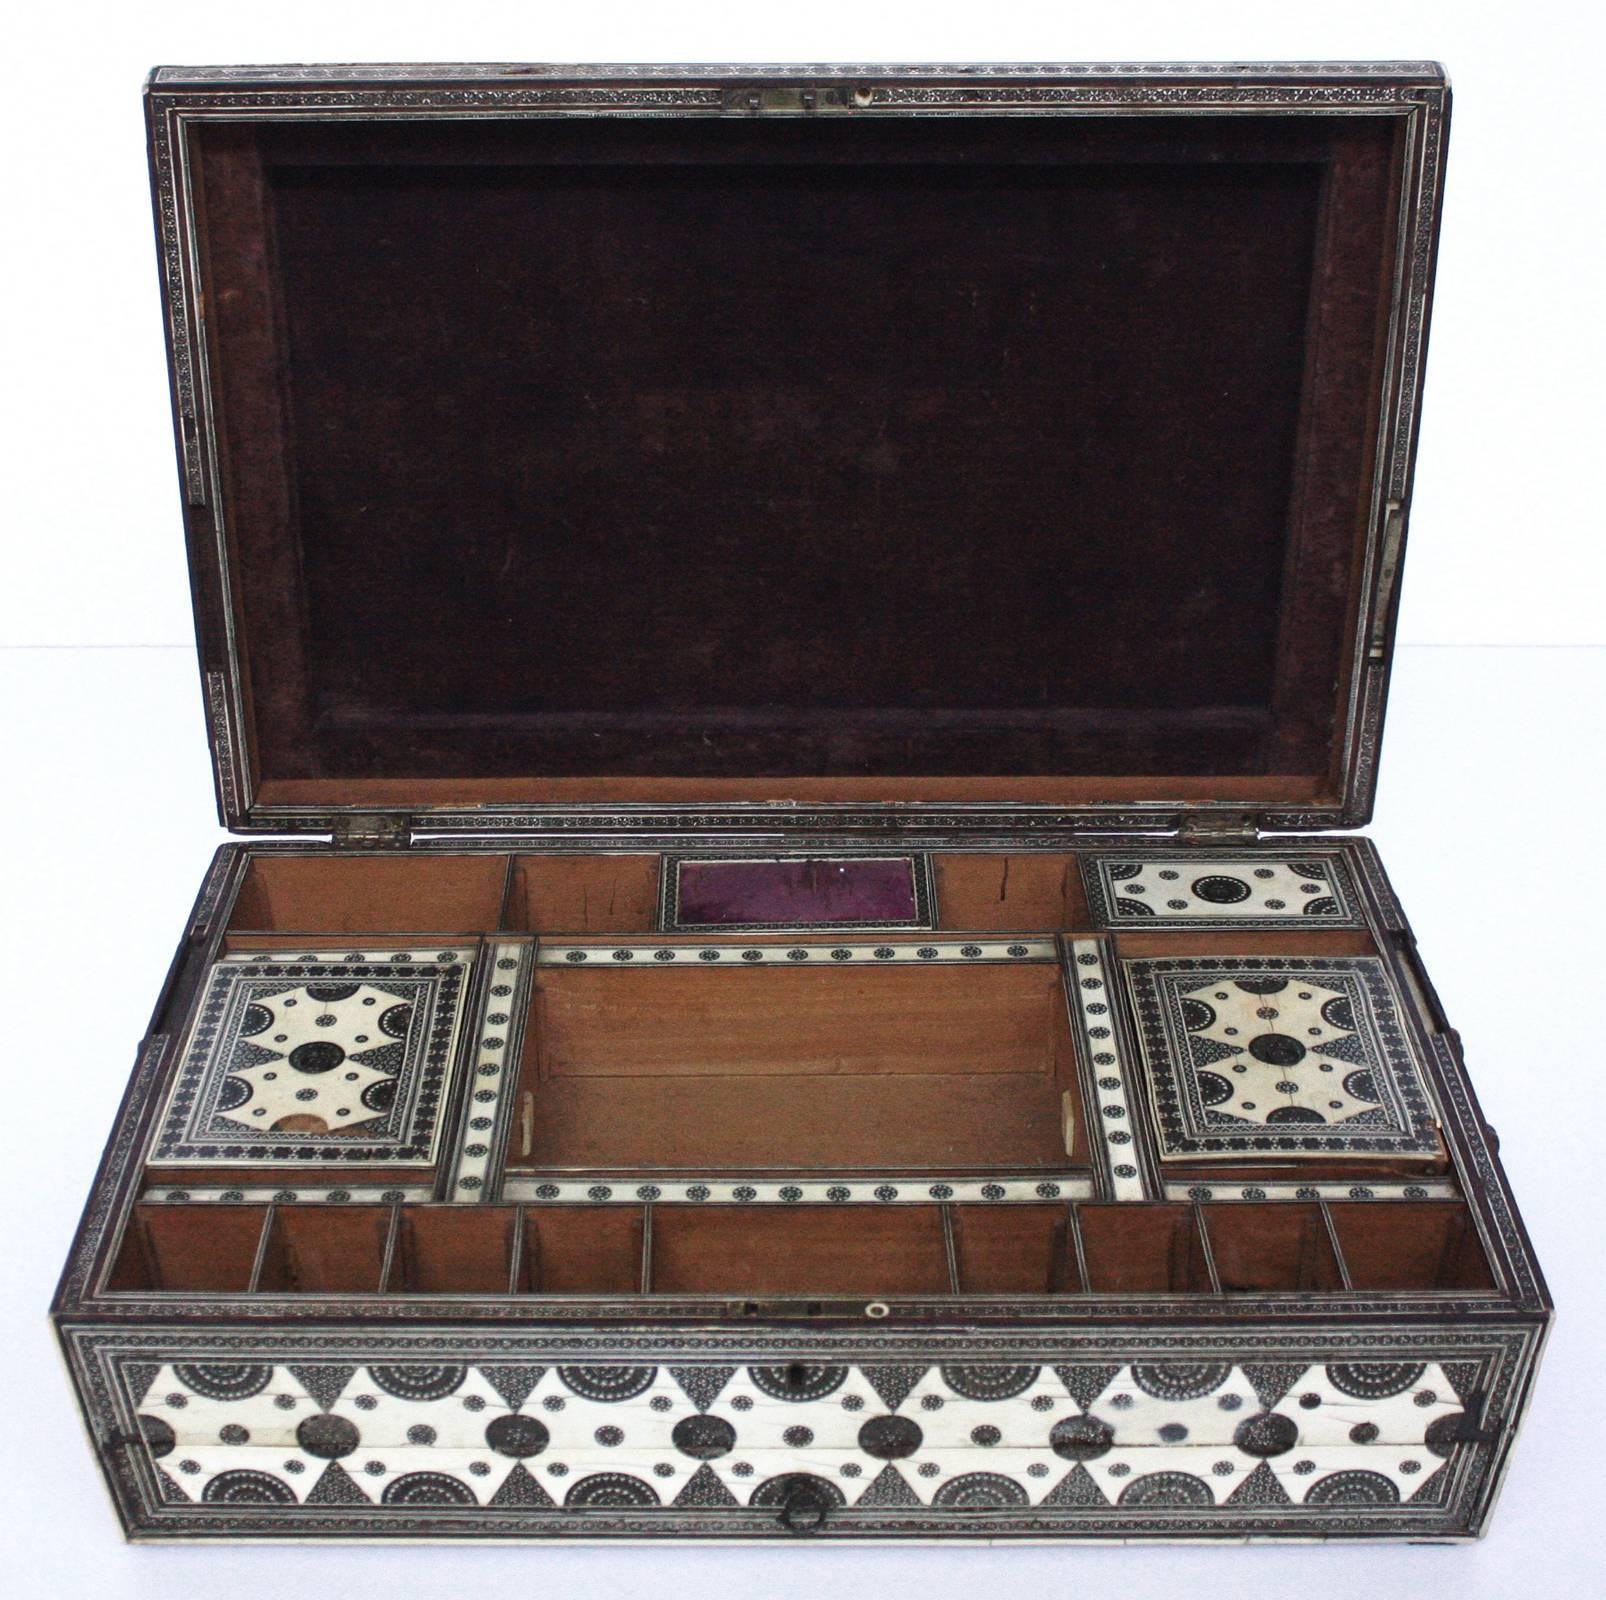 A large 19th century work box of bone and mother-of-pearl, micro mosaic decoration, interior trimmed in purple velvet with divided compartments, many with tops, some losses.